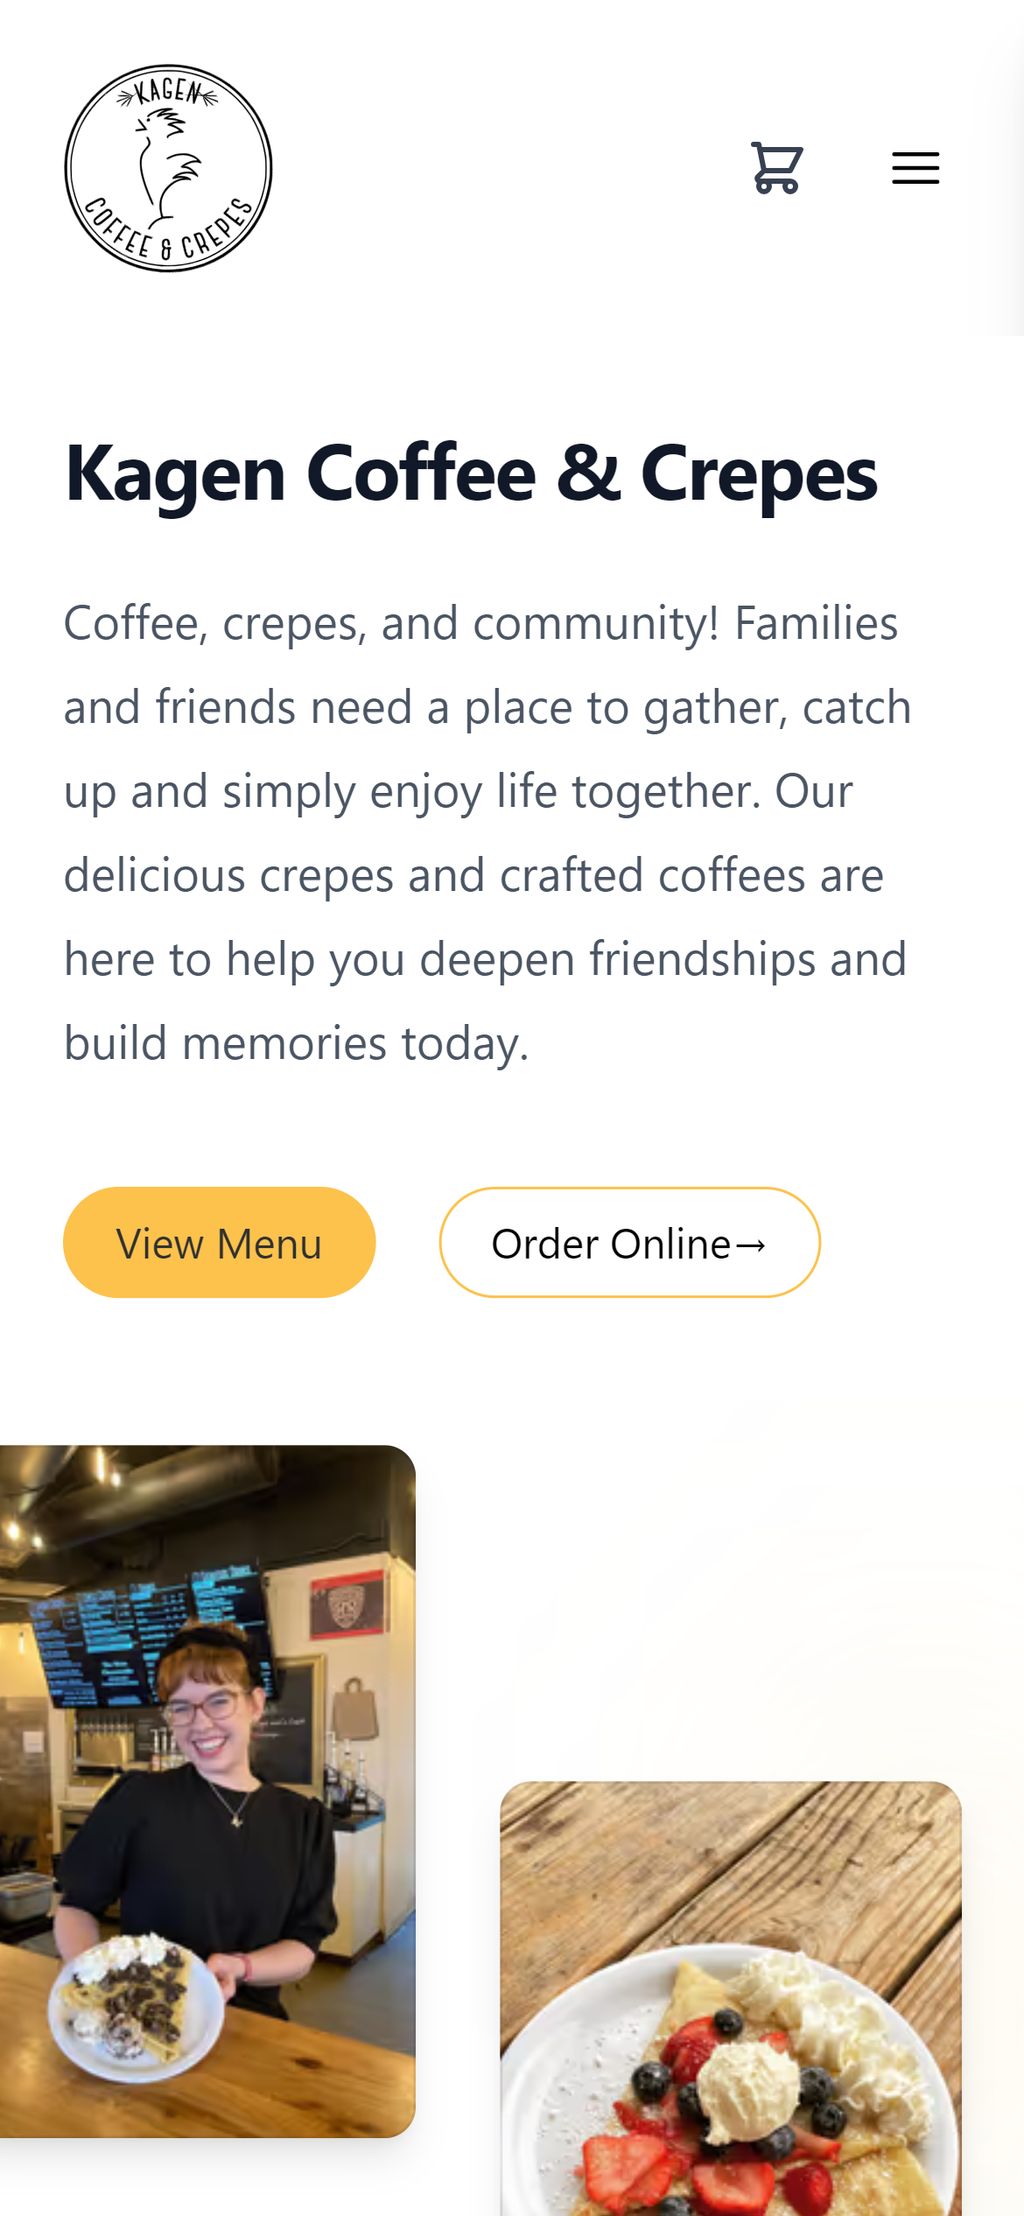 Kagen Coffee and Crepes mobile website screen capture